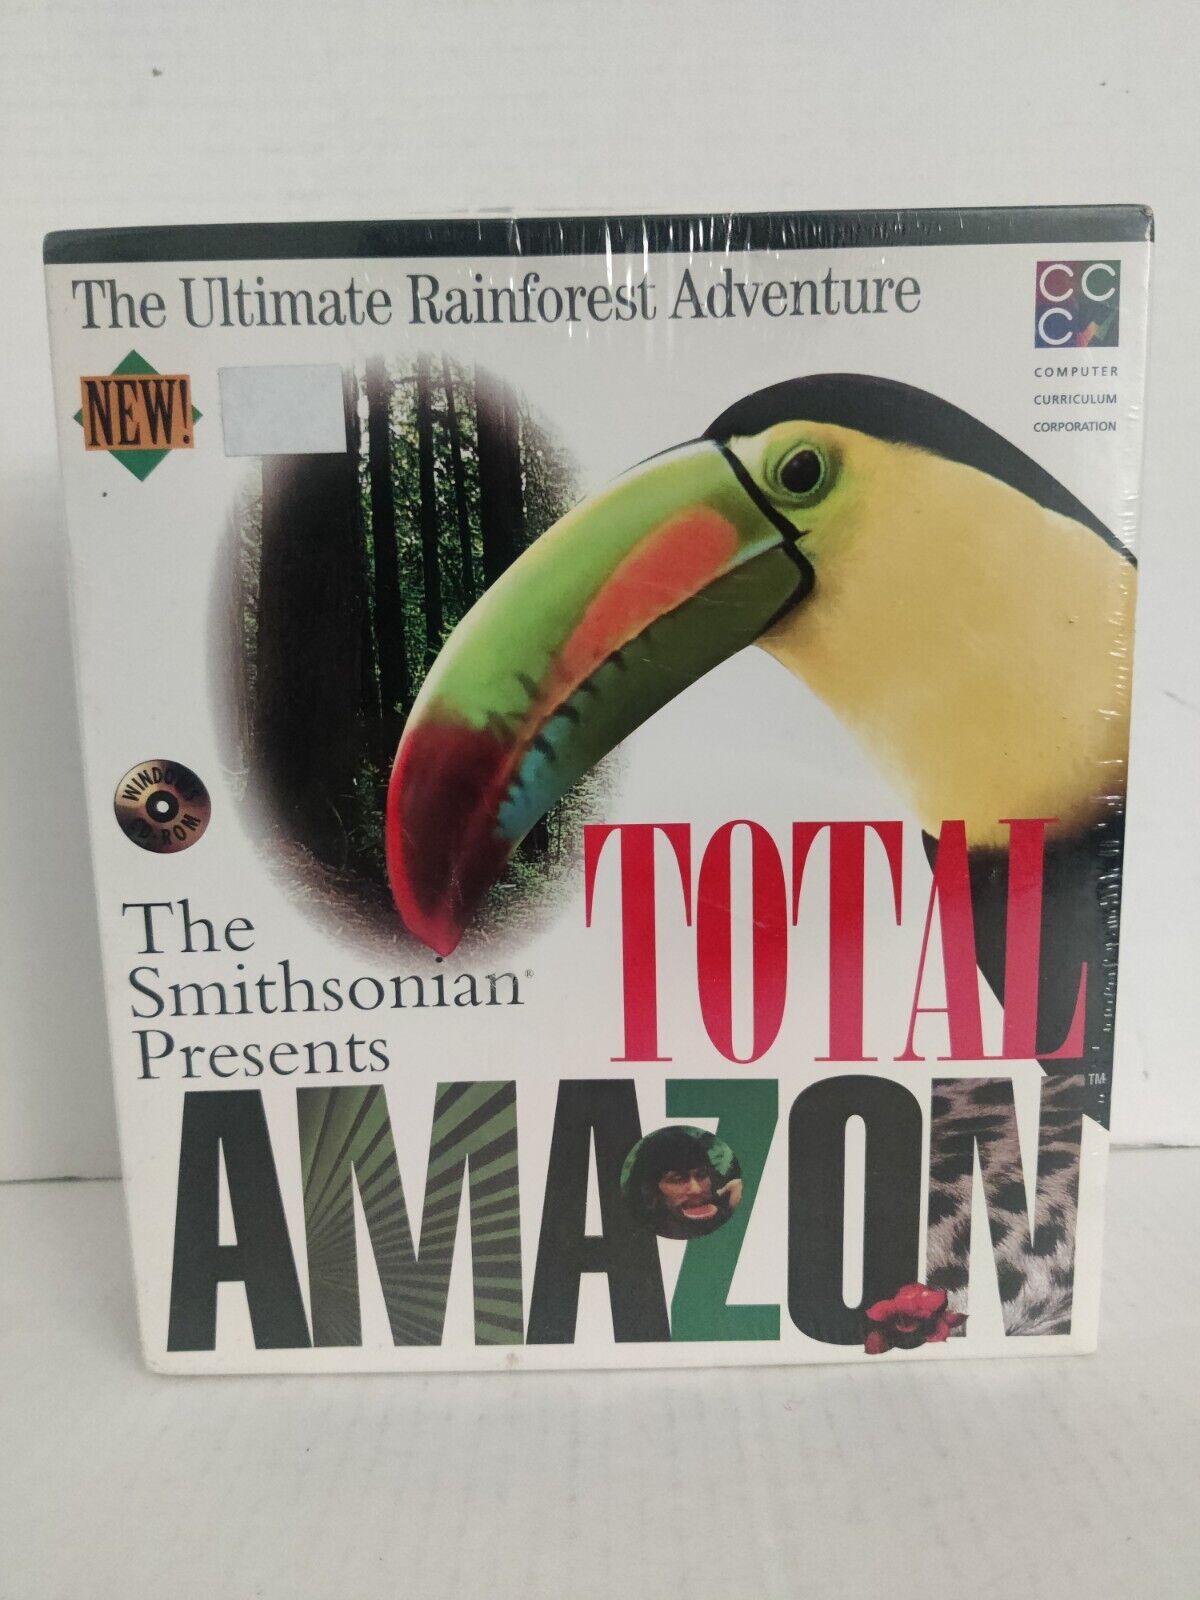 The Smithsonian Presents: Total Amazon (PC, 1995) - Brand New & Sealed